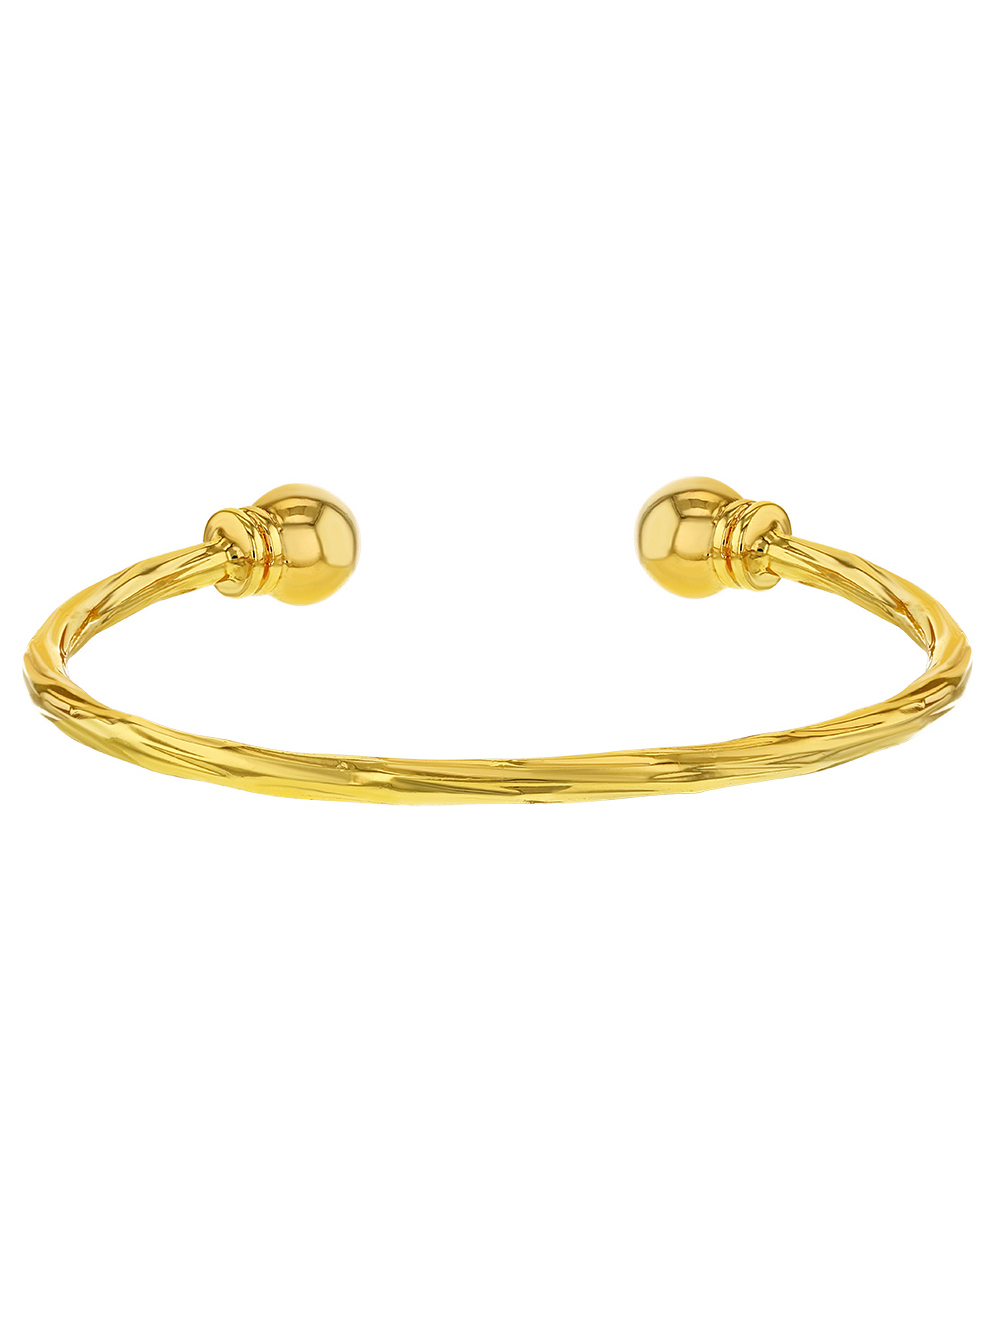 Shiny Yellow Gold Plated Adorable Twisted Cable Cuff Newborn Baby Bracelet 40mm - image 1 of 4